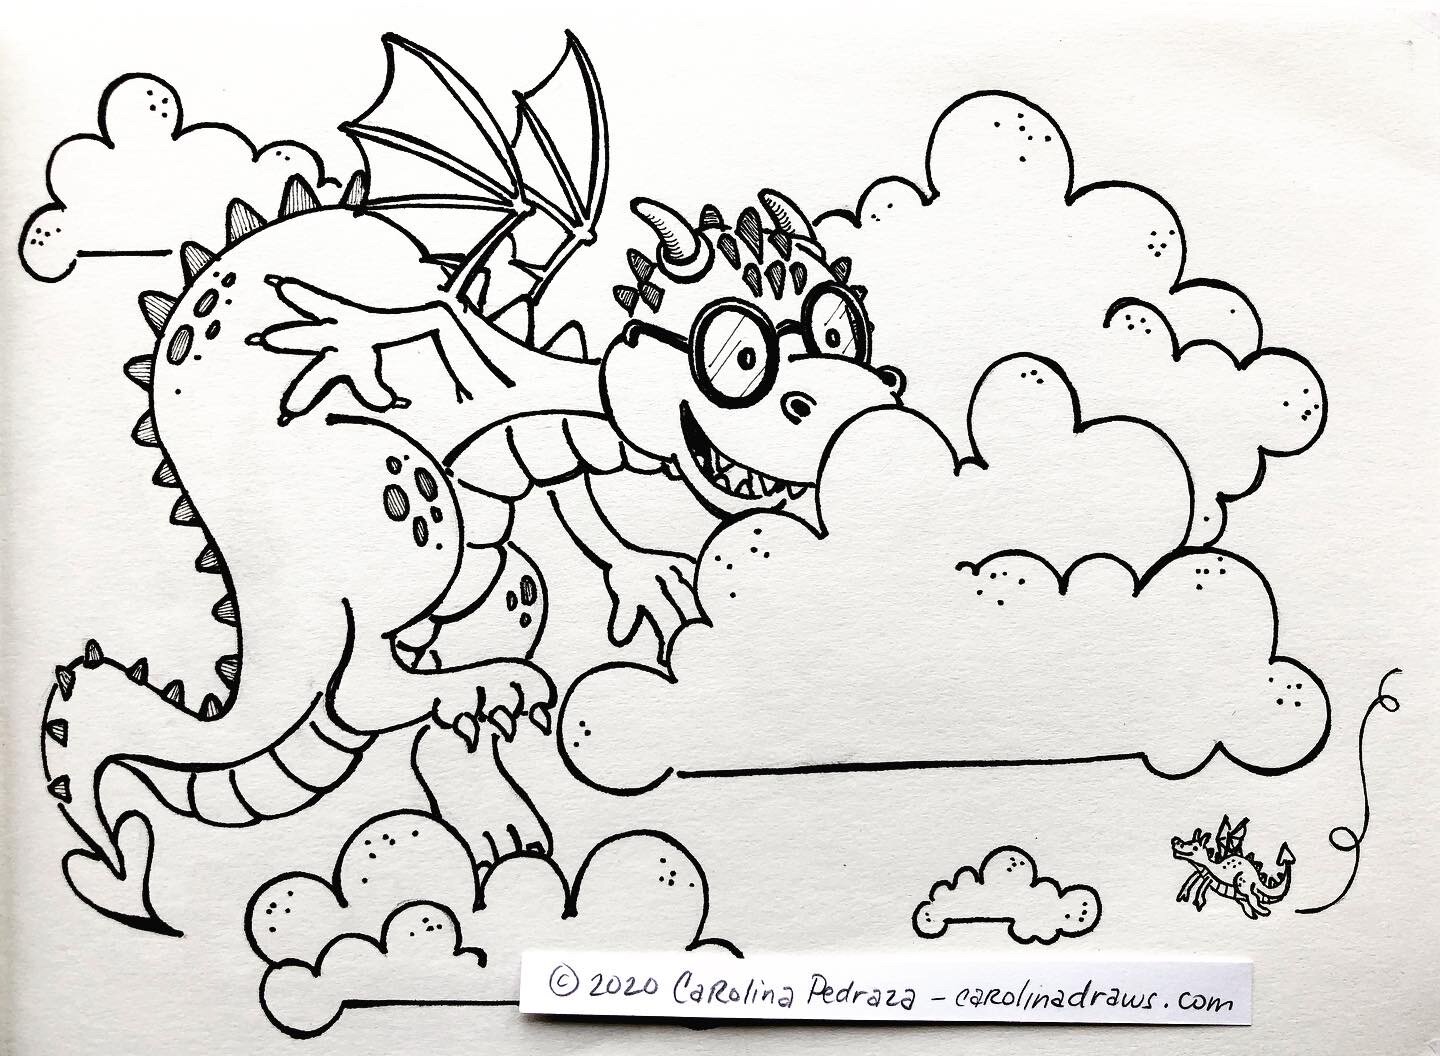  a dragon, playing cloud   and seek (hide and seek)  and one has super sight,  with 13 bumps on his head  (Jonah, 6 and Elijah, 3) 